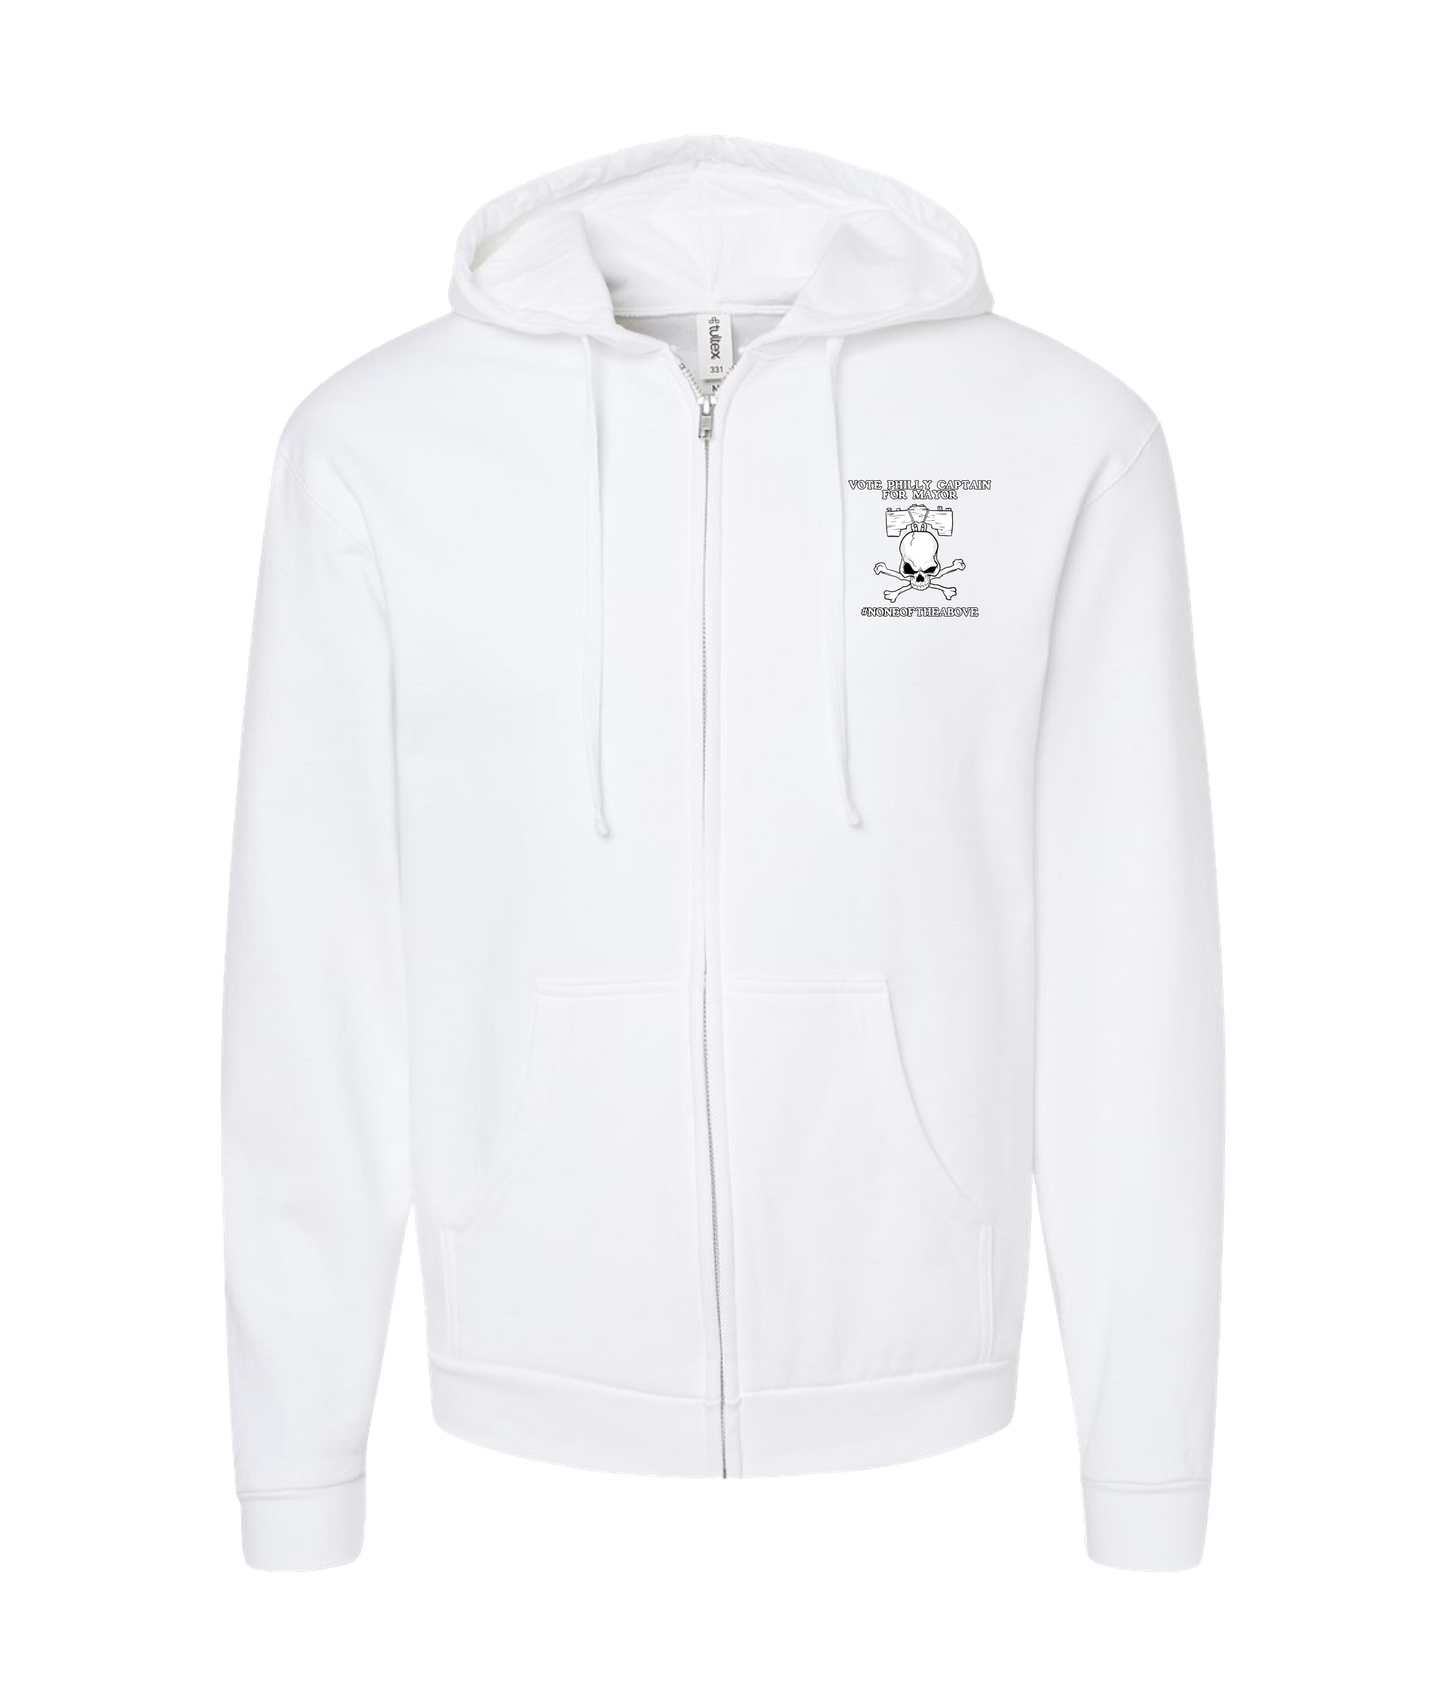 The Philly Captain's Merch is Fire - VOTE - White Zip Up Hoodie